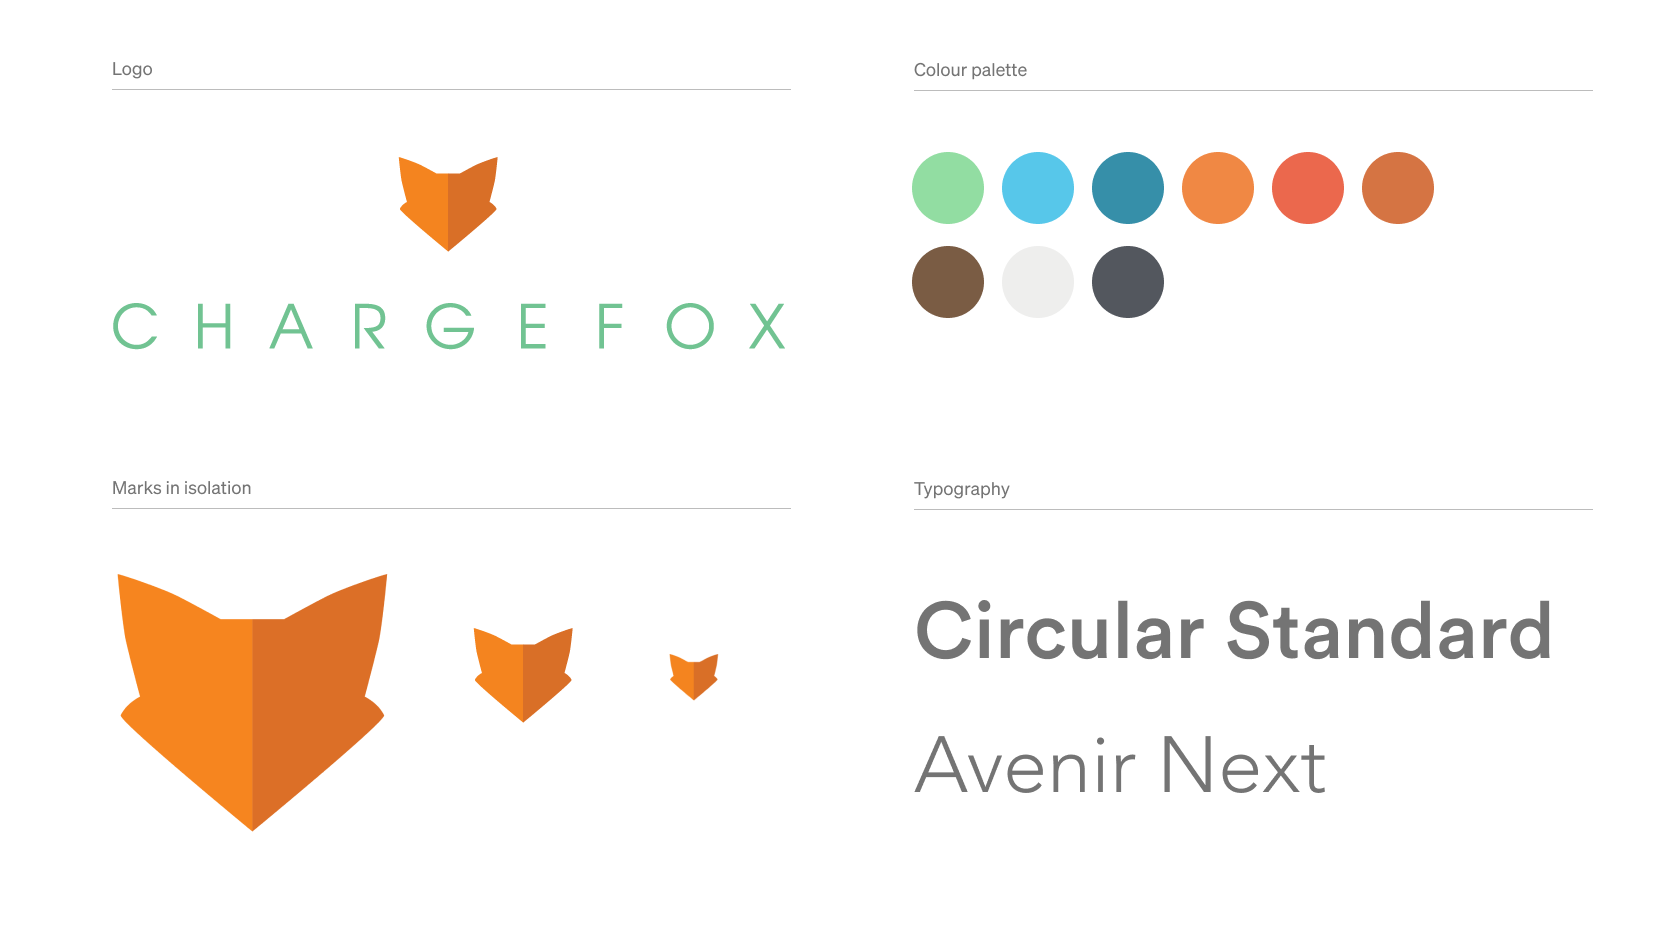 An image of the Chargefox logo, colour palette and typography selection